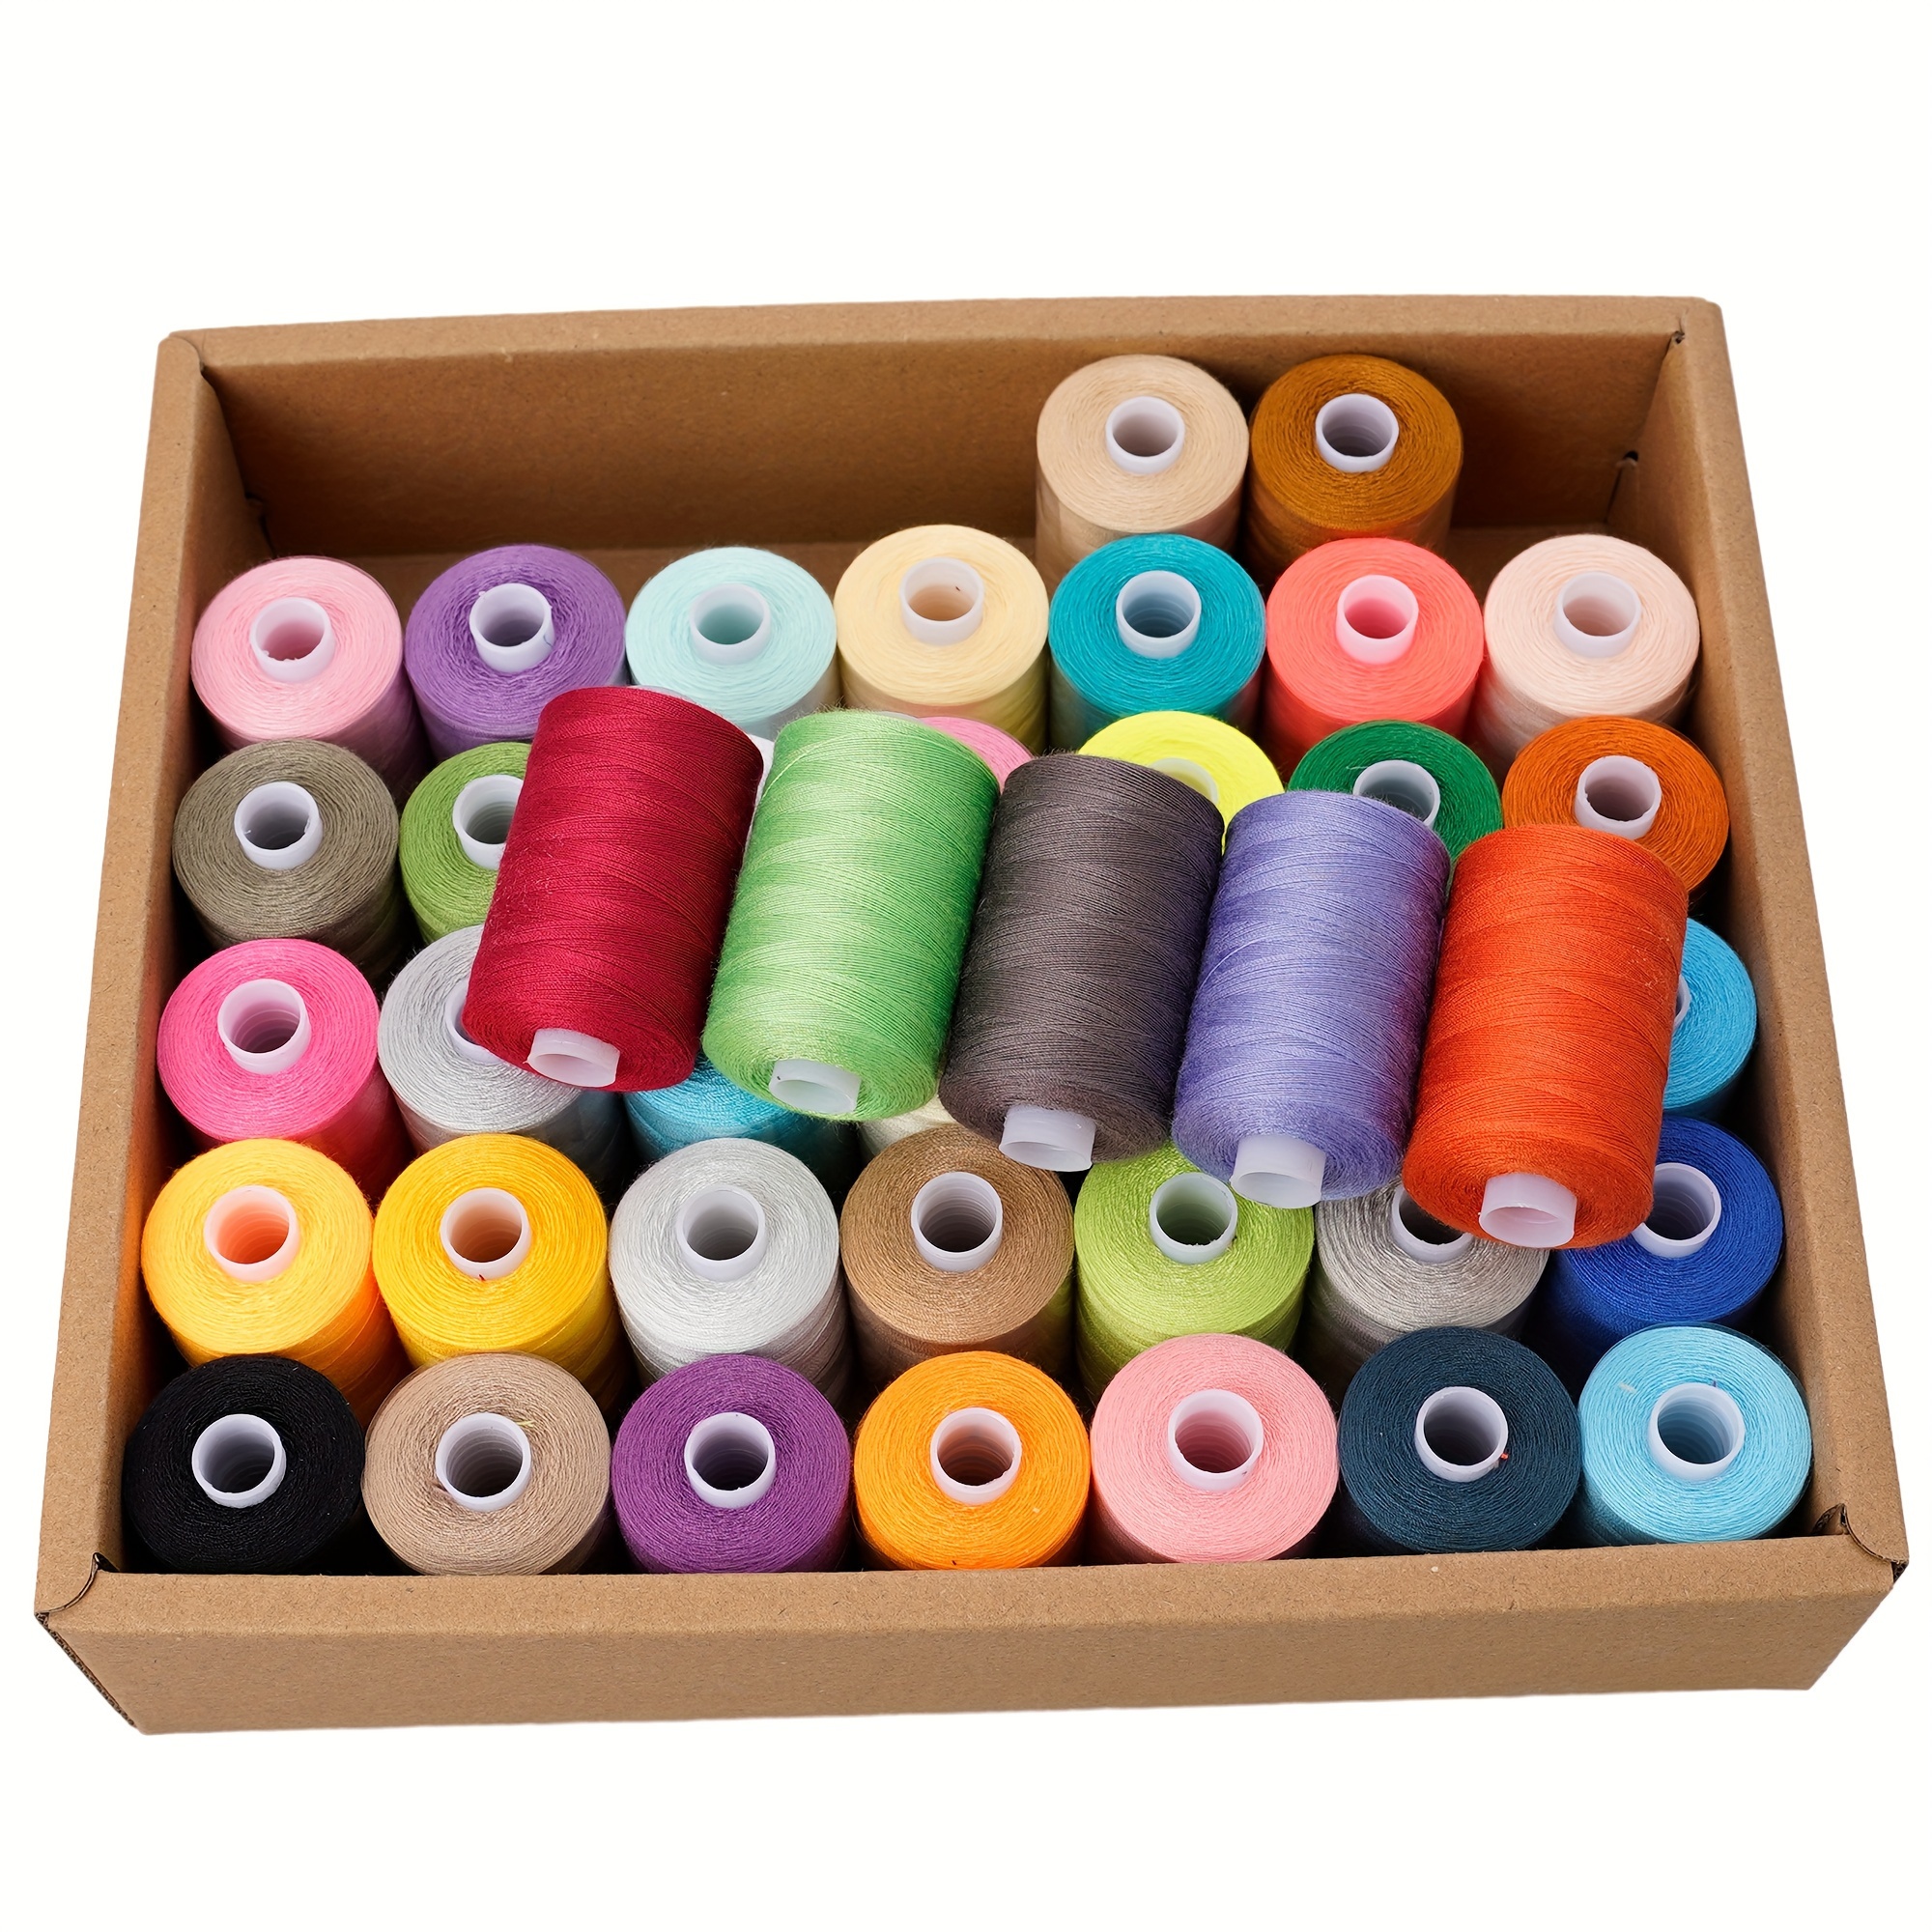 

42pcs/set 1000 Yards Polyester Sewing Thread Kit For Hand Sewing And Machine Sewing Use, Assorted 42 Colors Sewing Thread With Storage Box